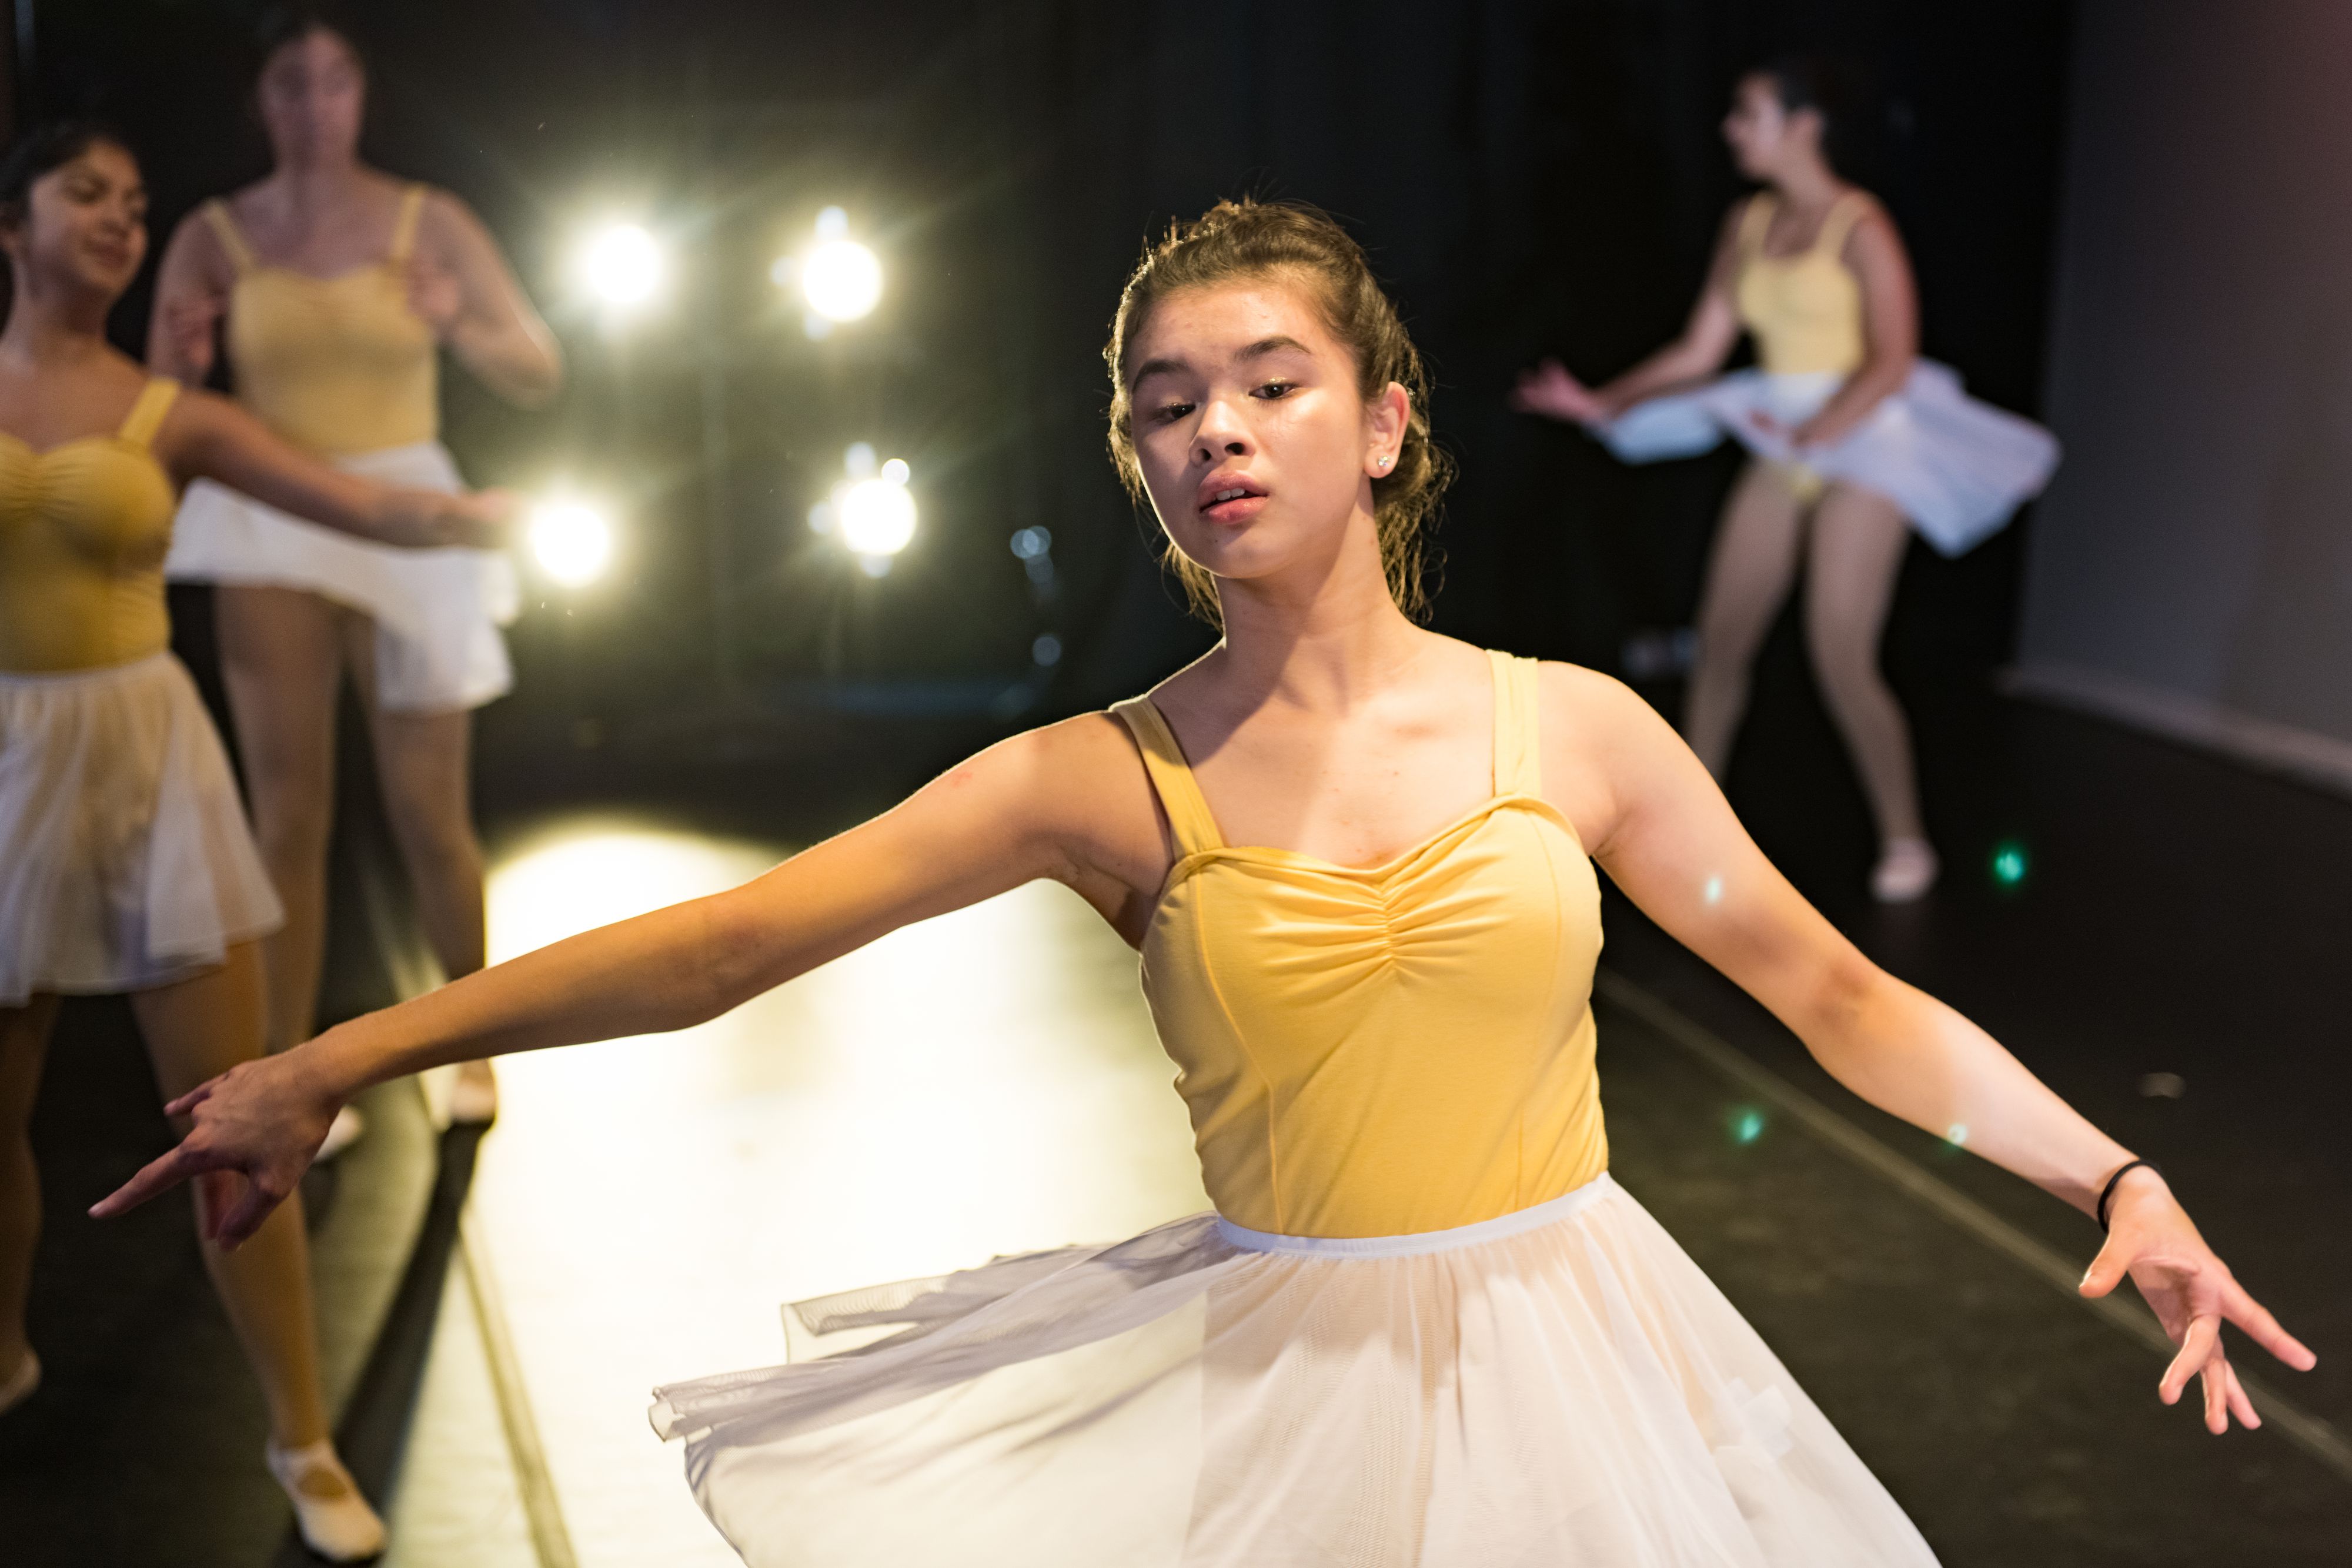 Young Ballerina on stage wearing yellow and white with three others and lights in background